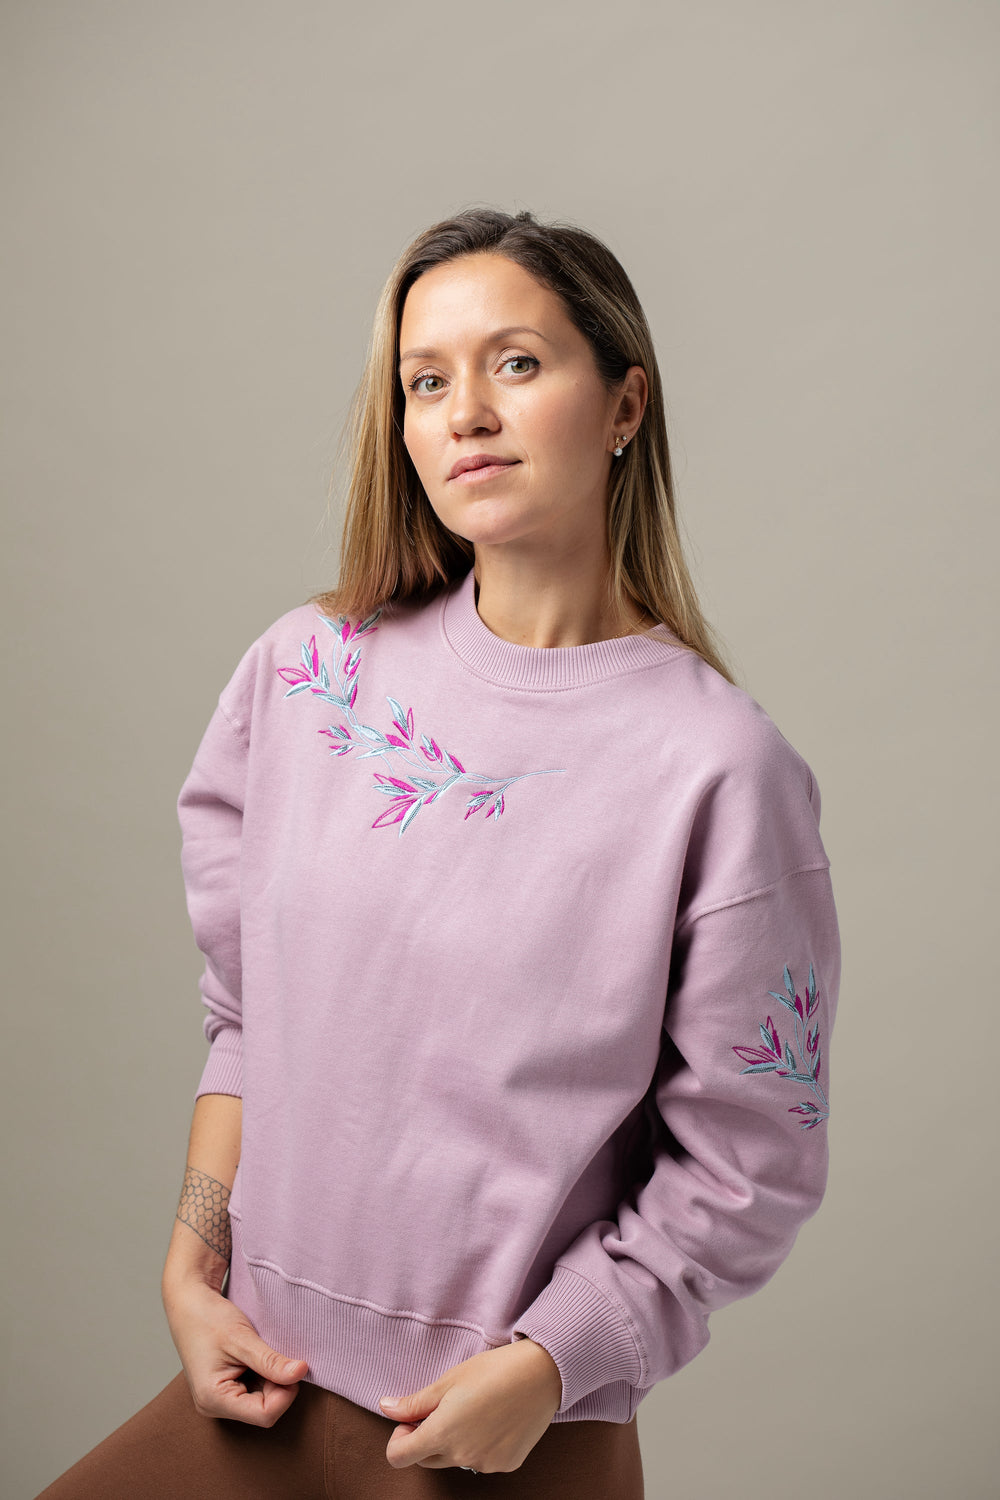 "Silver willow" embroidered sweatshirt